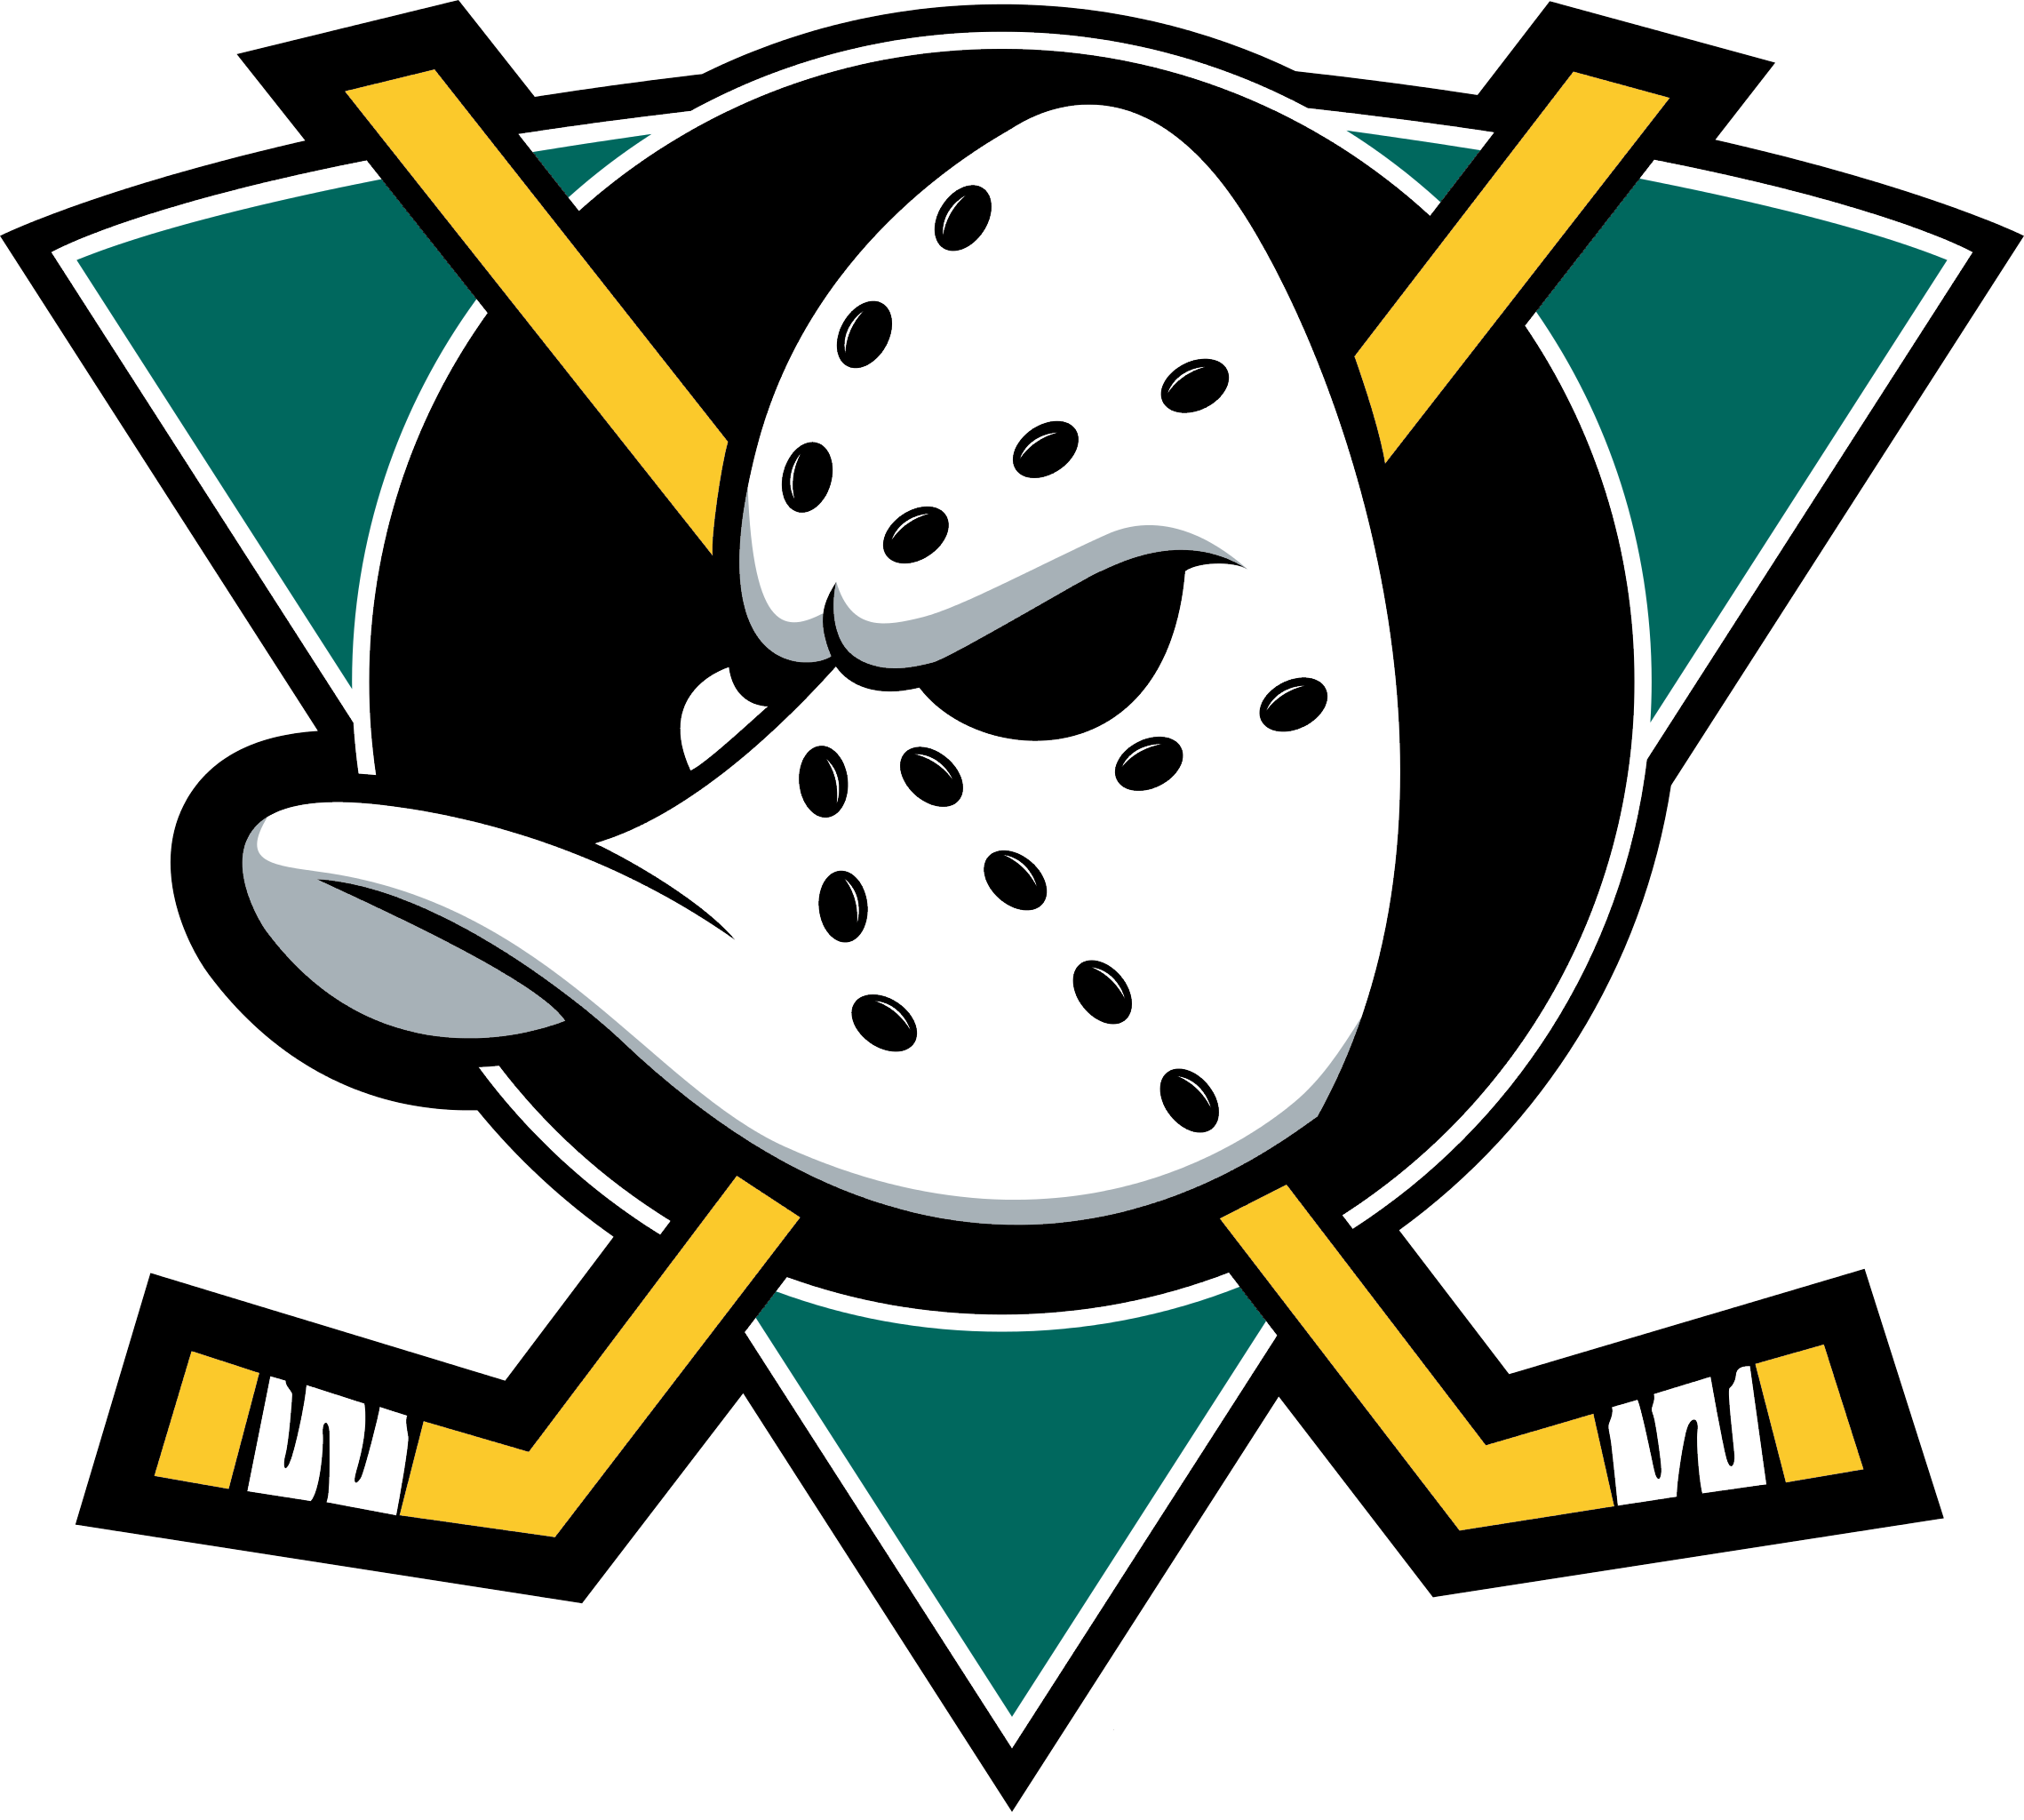 Why Disney turned The Mighty Ducks movie into an actual NHL team